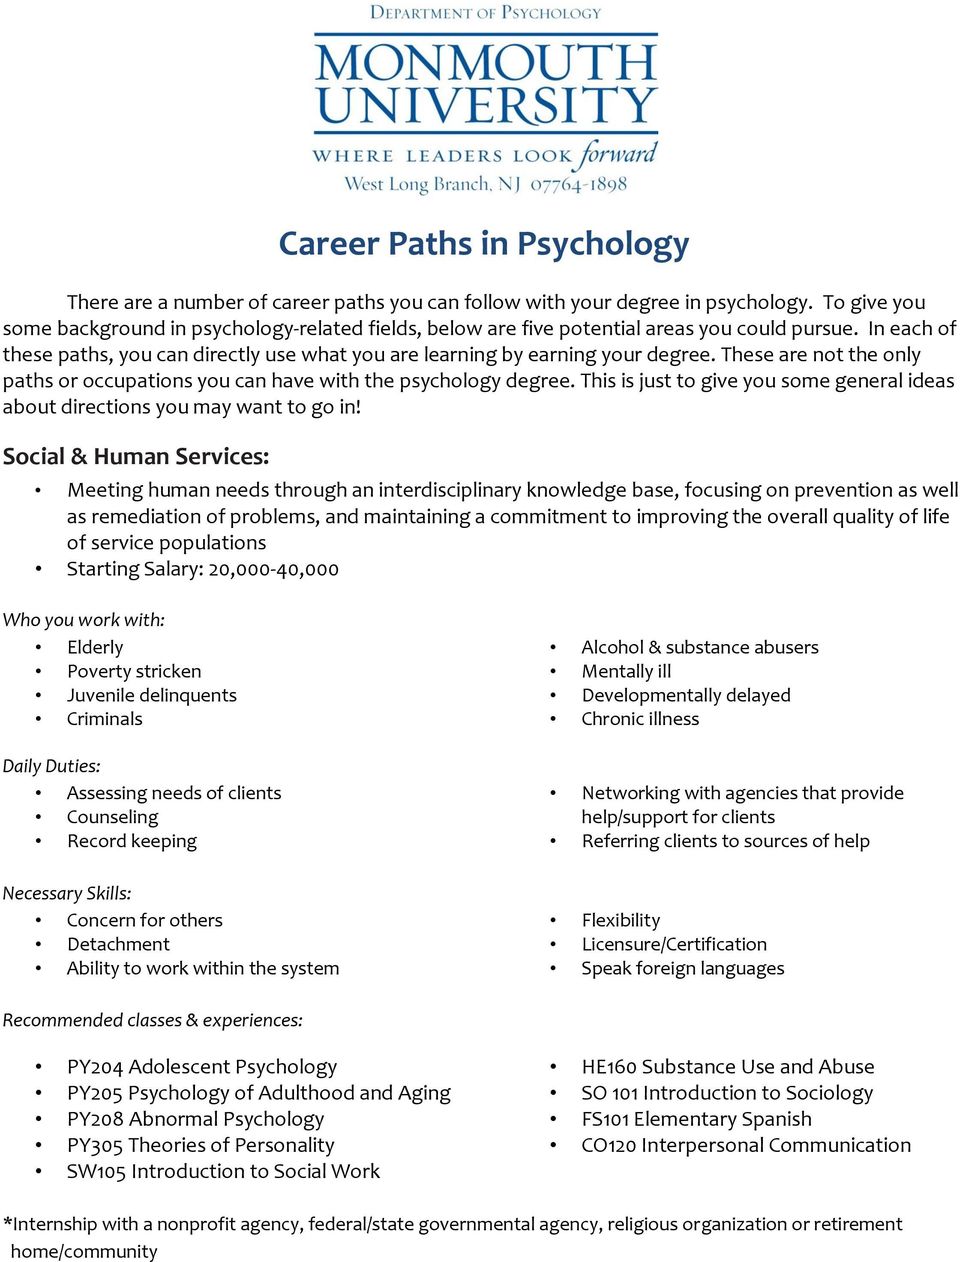 These are not the only paths or occupations you can have with the psychology degree. This is just to give you some general ideas about directions you may want to go in!